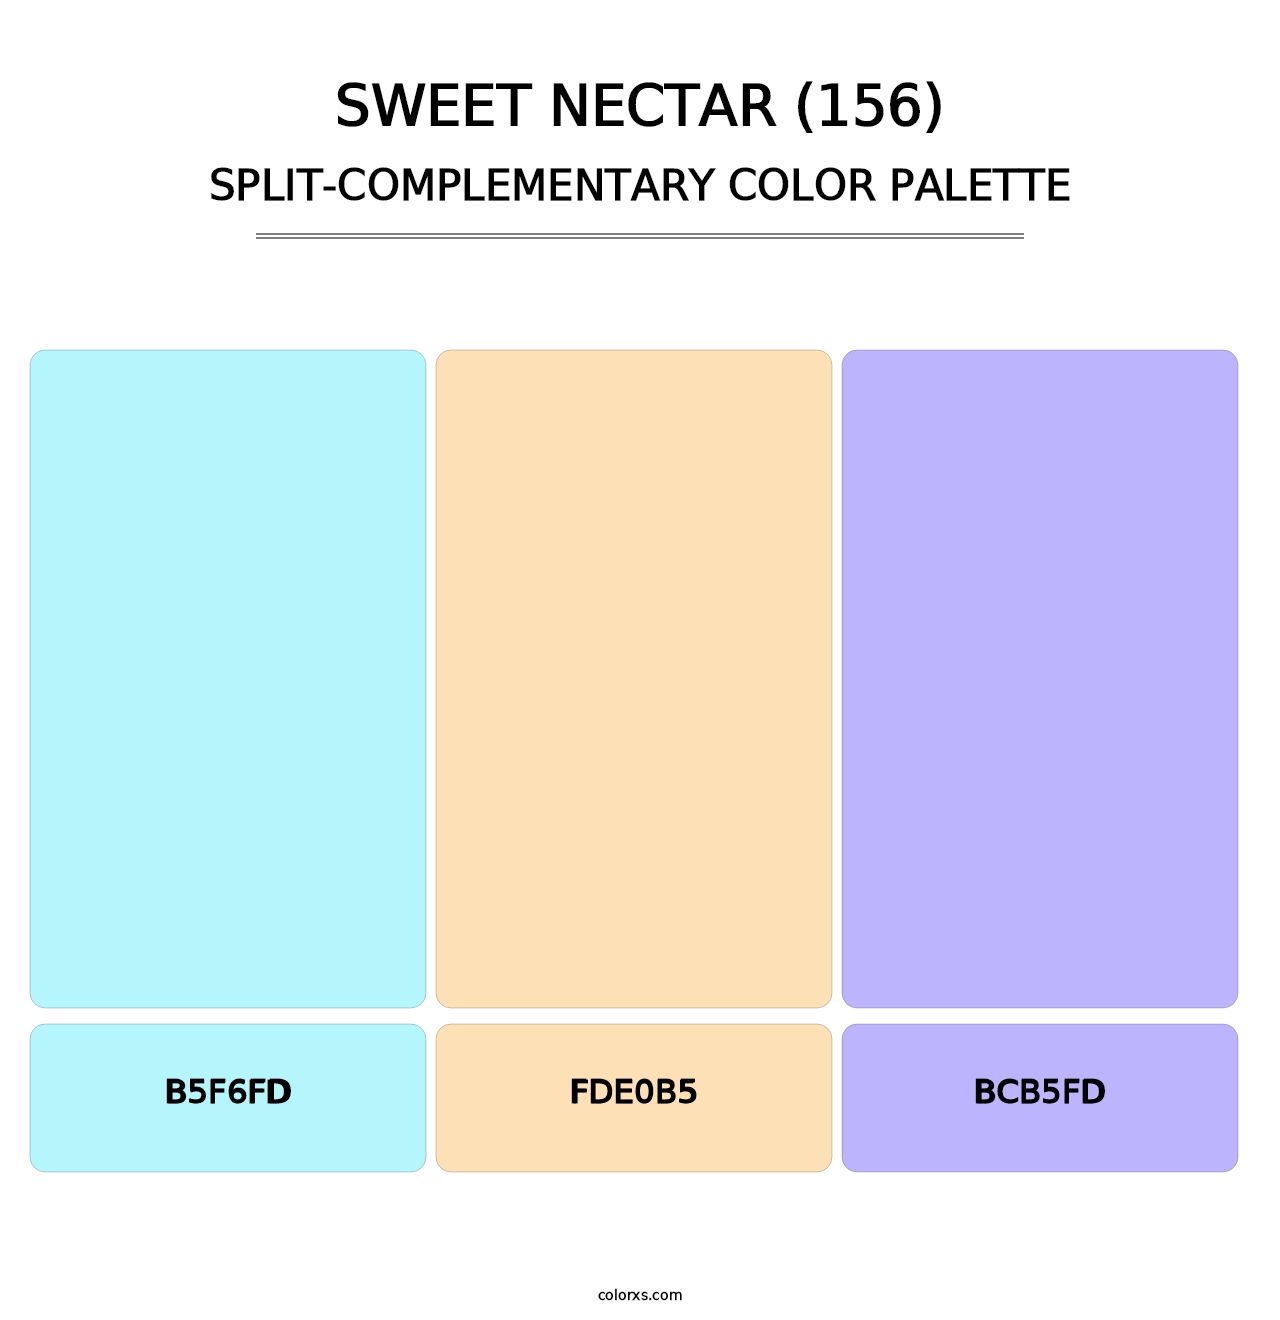 Sweet Nectar (156) - Split-Complementary Color Palette